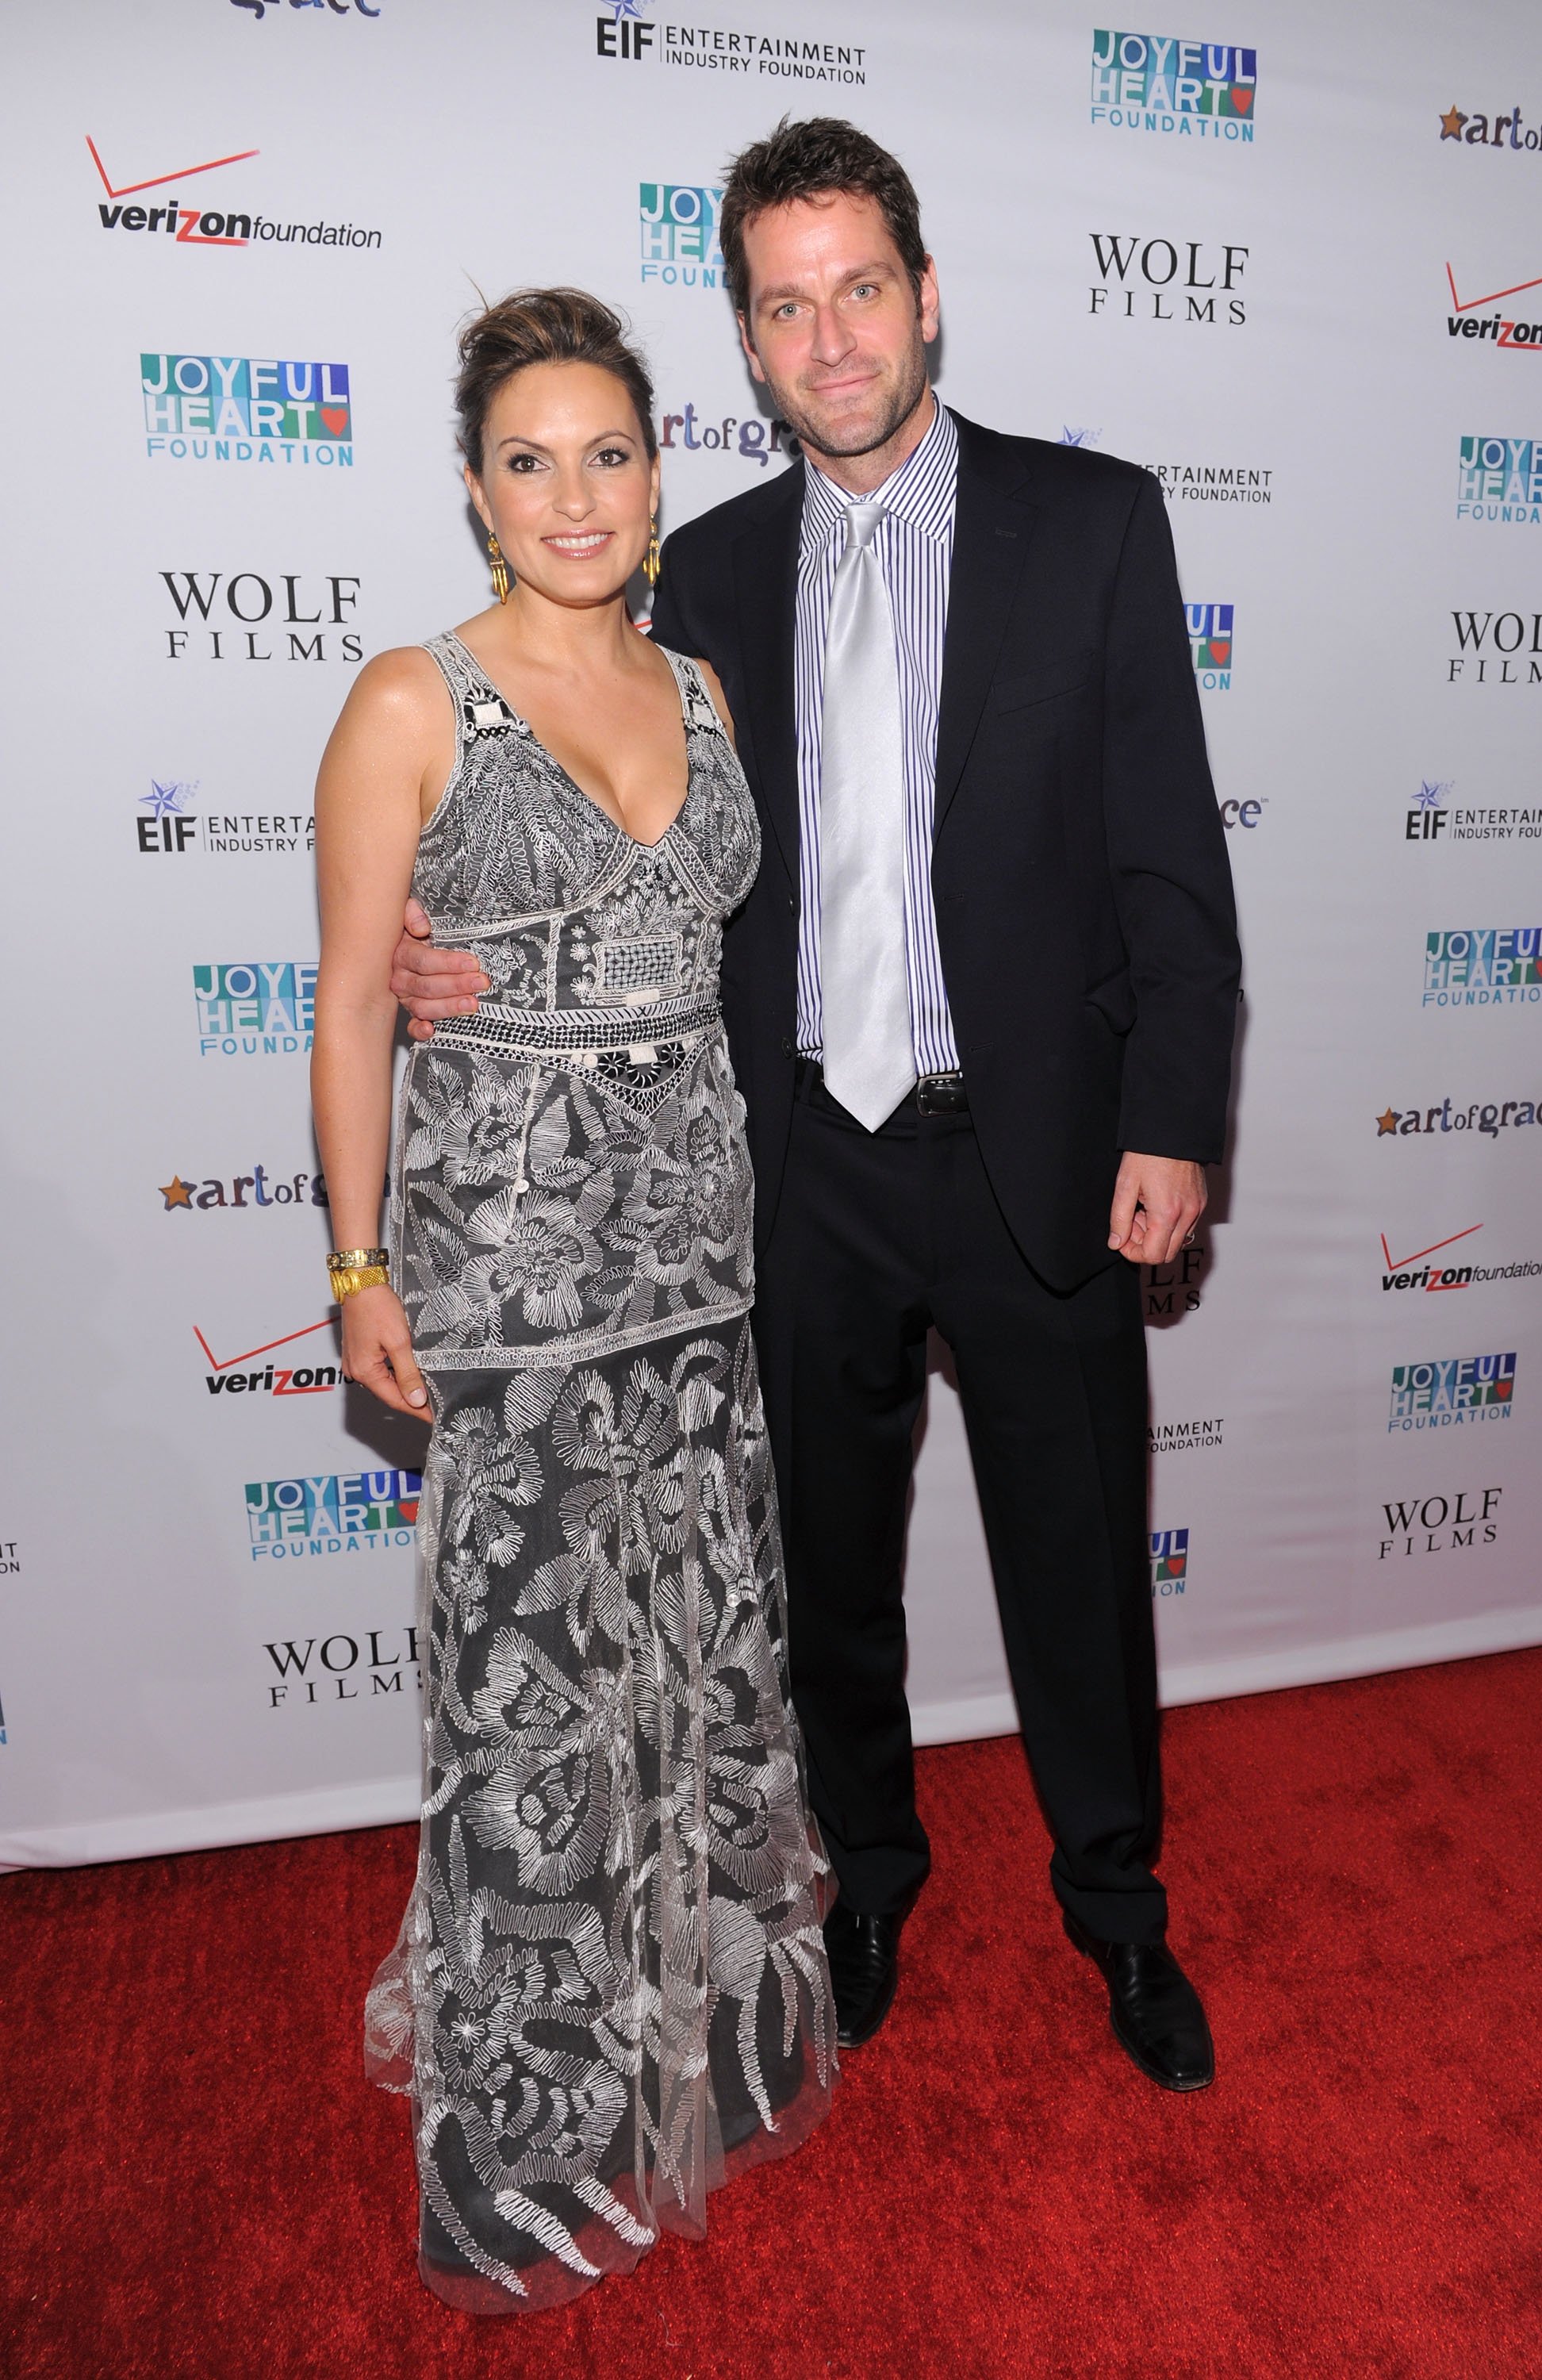 Mariska Hargitay and Peter Hermann attend the Joyful Heart Foundation Gala in New York City on May 17, 2011 | Photo: Getty Images